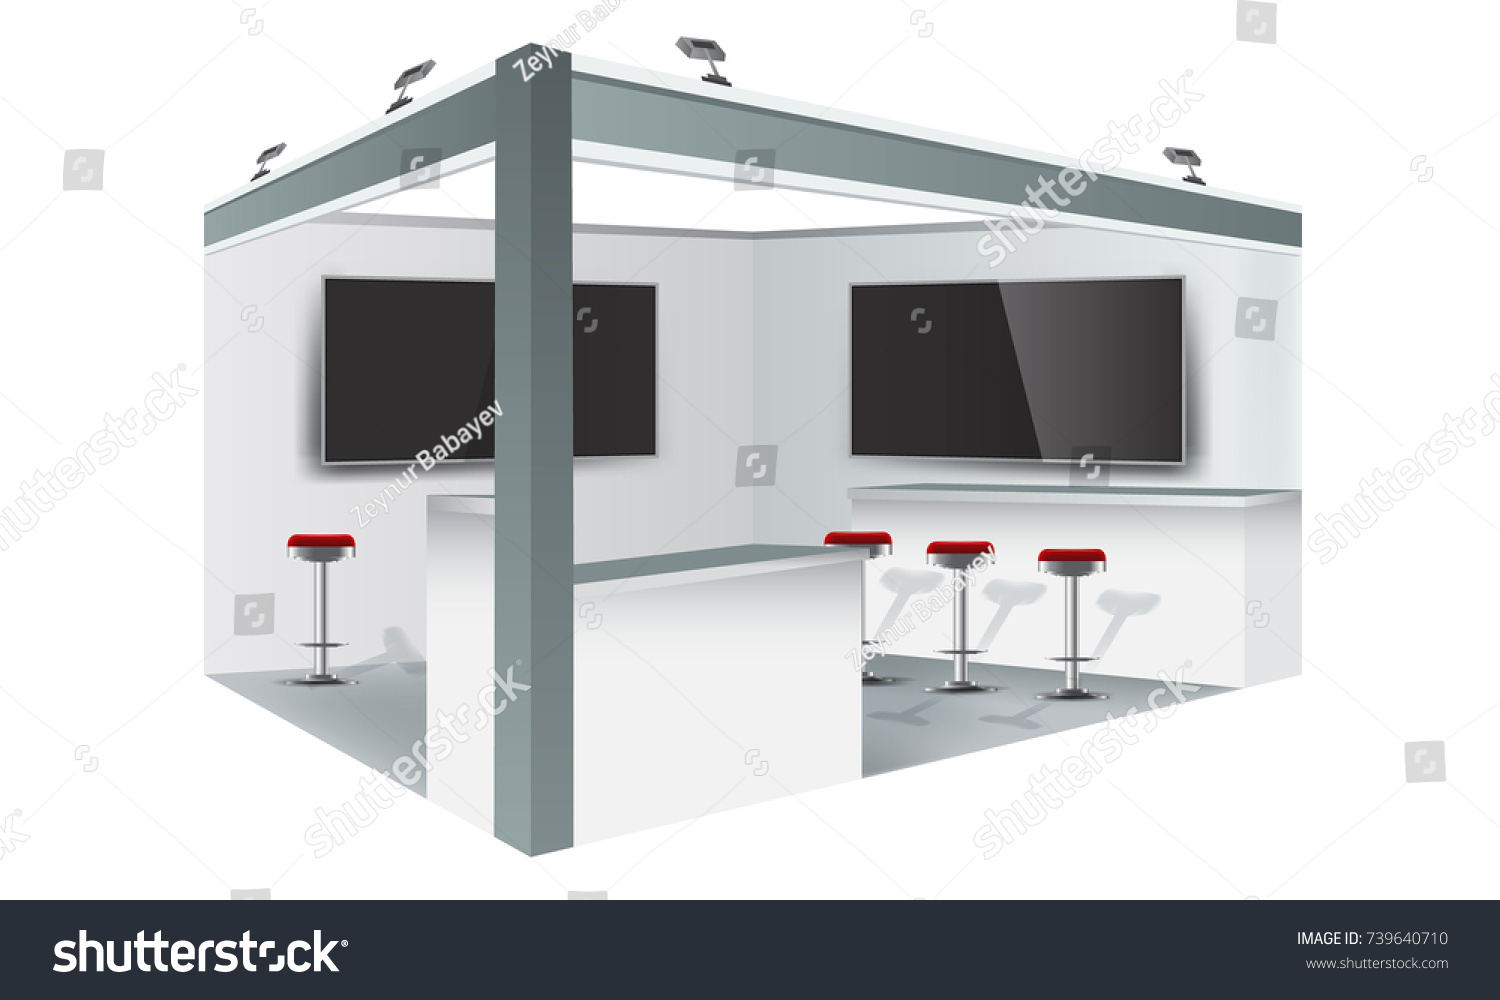 Download Exhibition Stand Display Trade Booth Mockup Stock Vector Royalty Free 739640710 PSD Mockup Templates